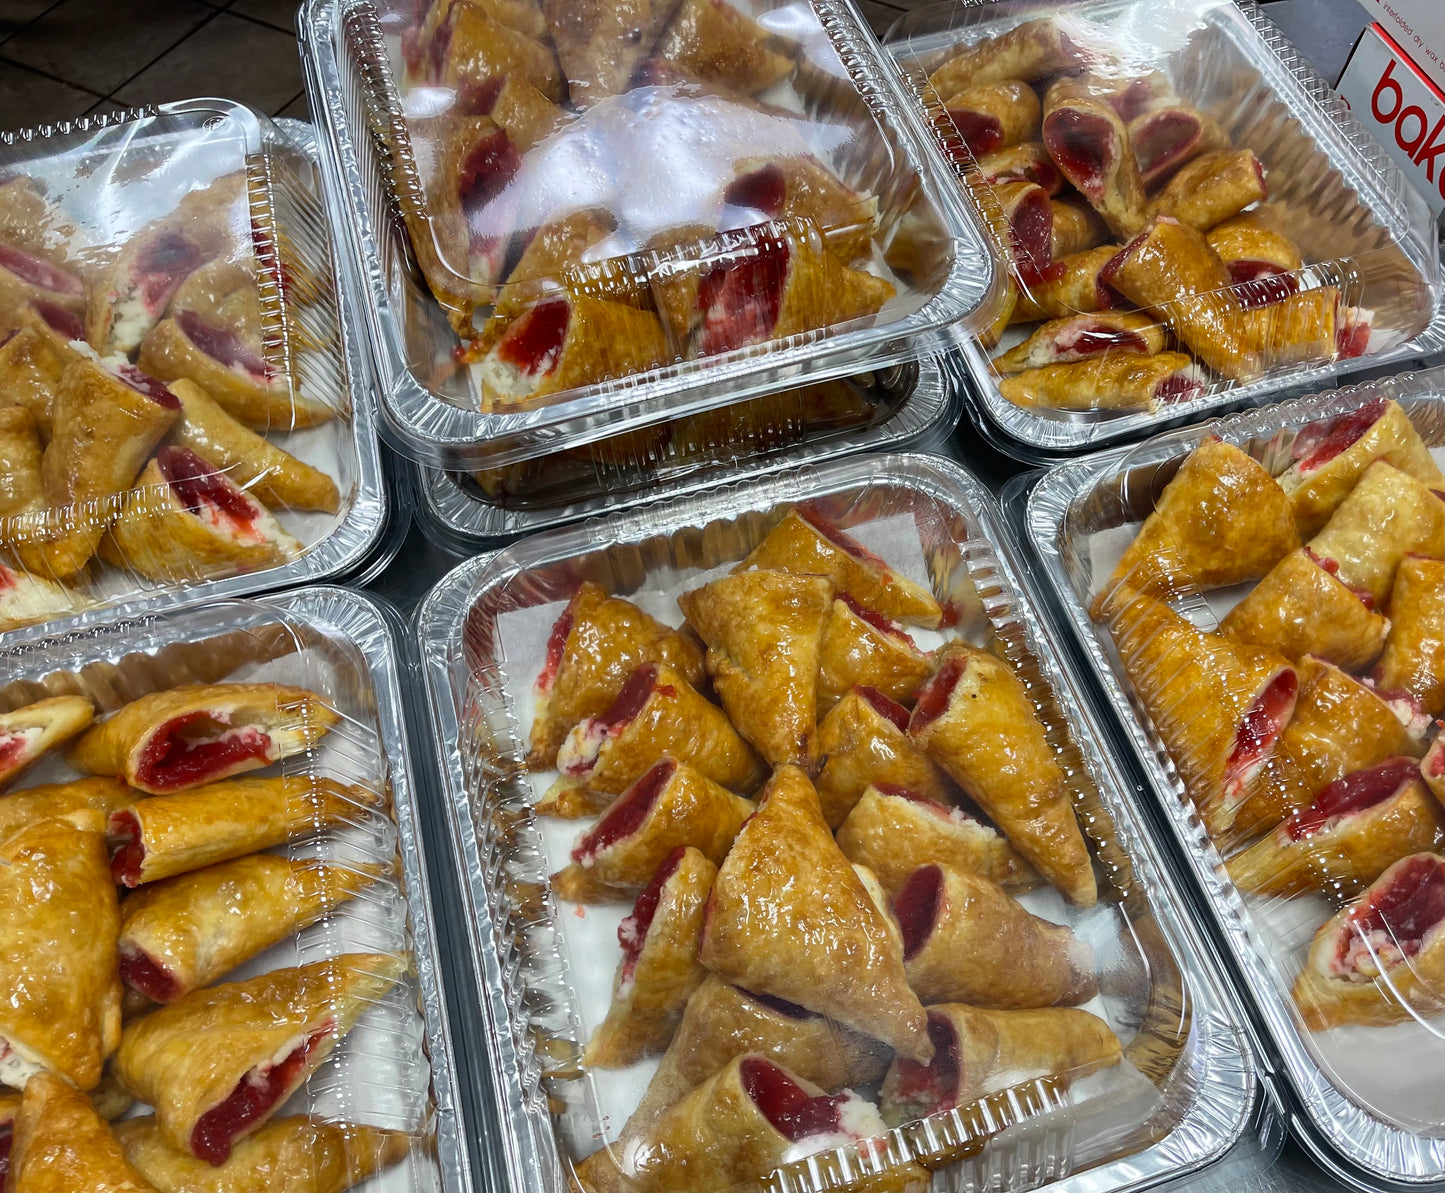 Party tray of 25 Pastries for pickup only